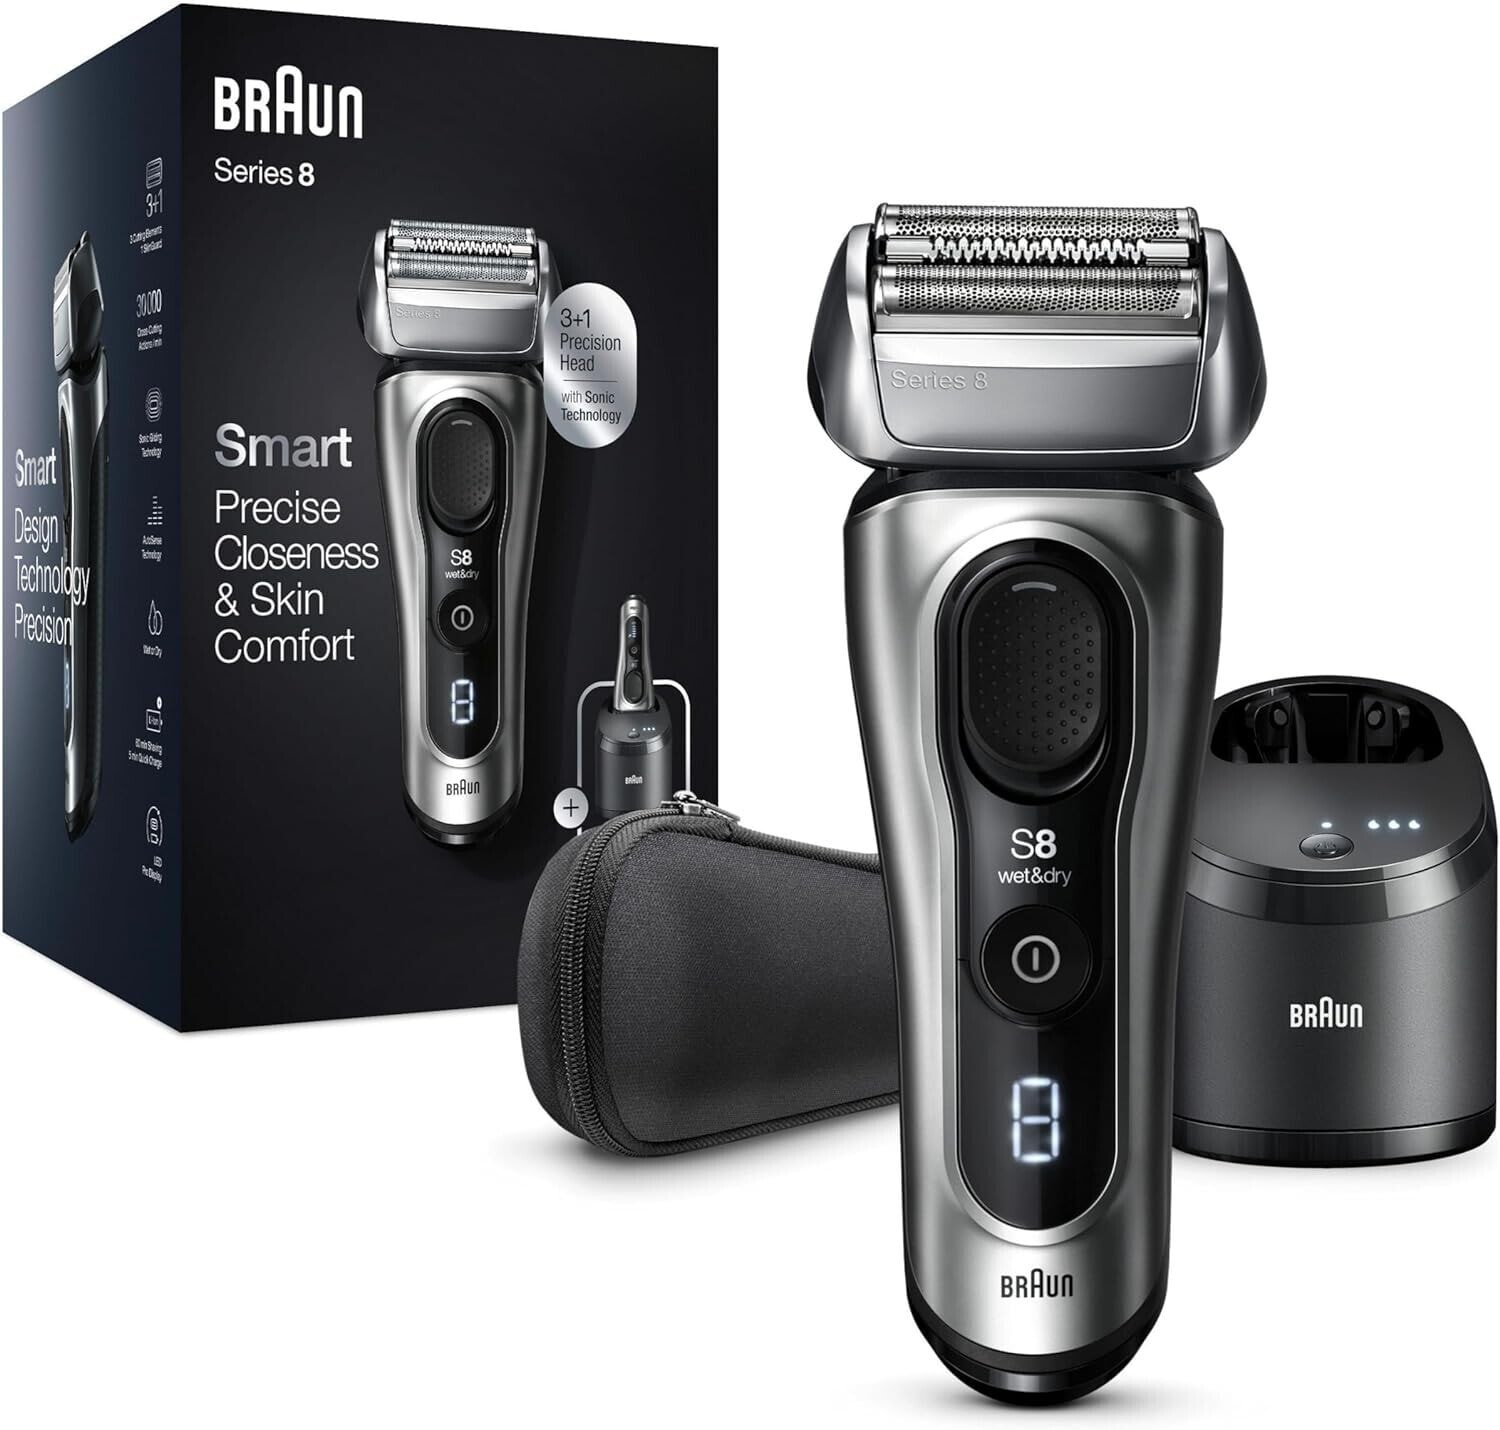 Braun Series 8 Men's Razor with 4+1 Shaving Head, Electric Shaver, Precision Long Hair Trimmer, Charging Station, 60 Minutes Running Time, Wet & Dry, Valentine's Day Gift for Him, 8517s, Silver